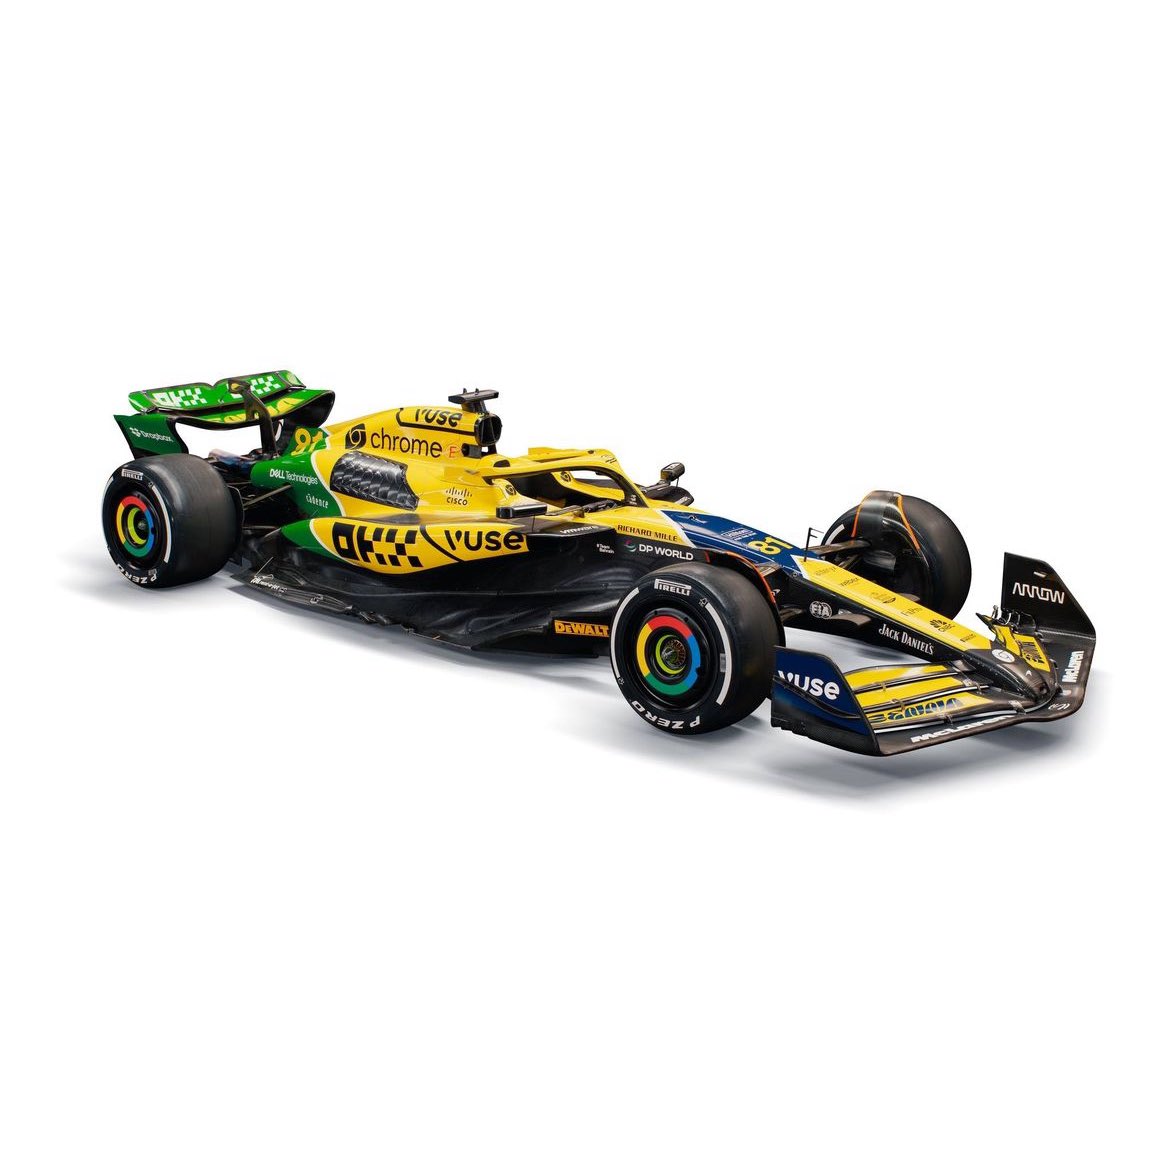 McLaren have revealed an Ayrton Senna-inspired livery for the #F1 Monaco GP!